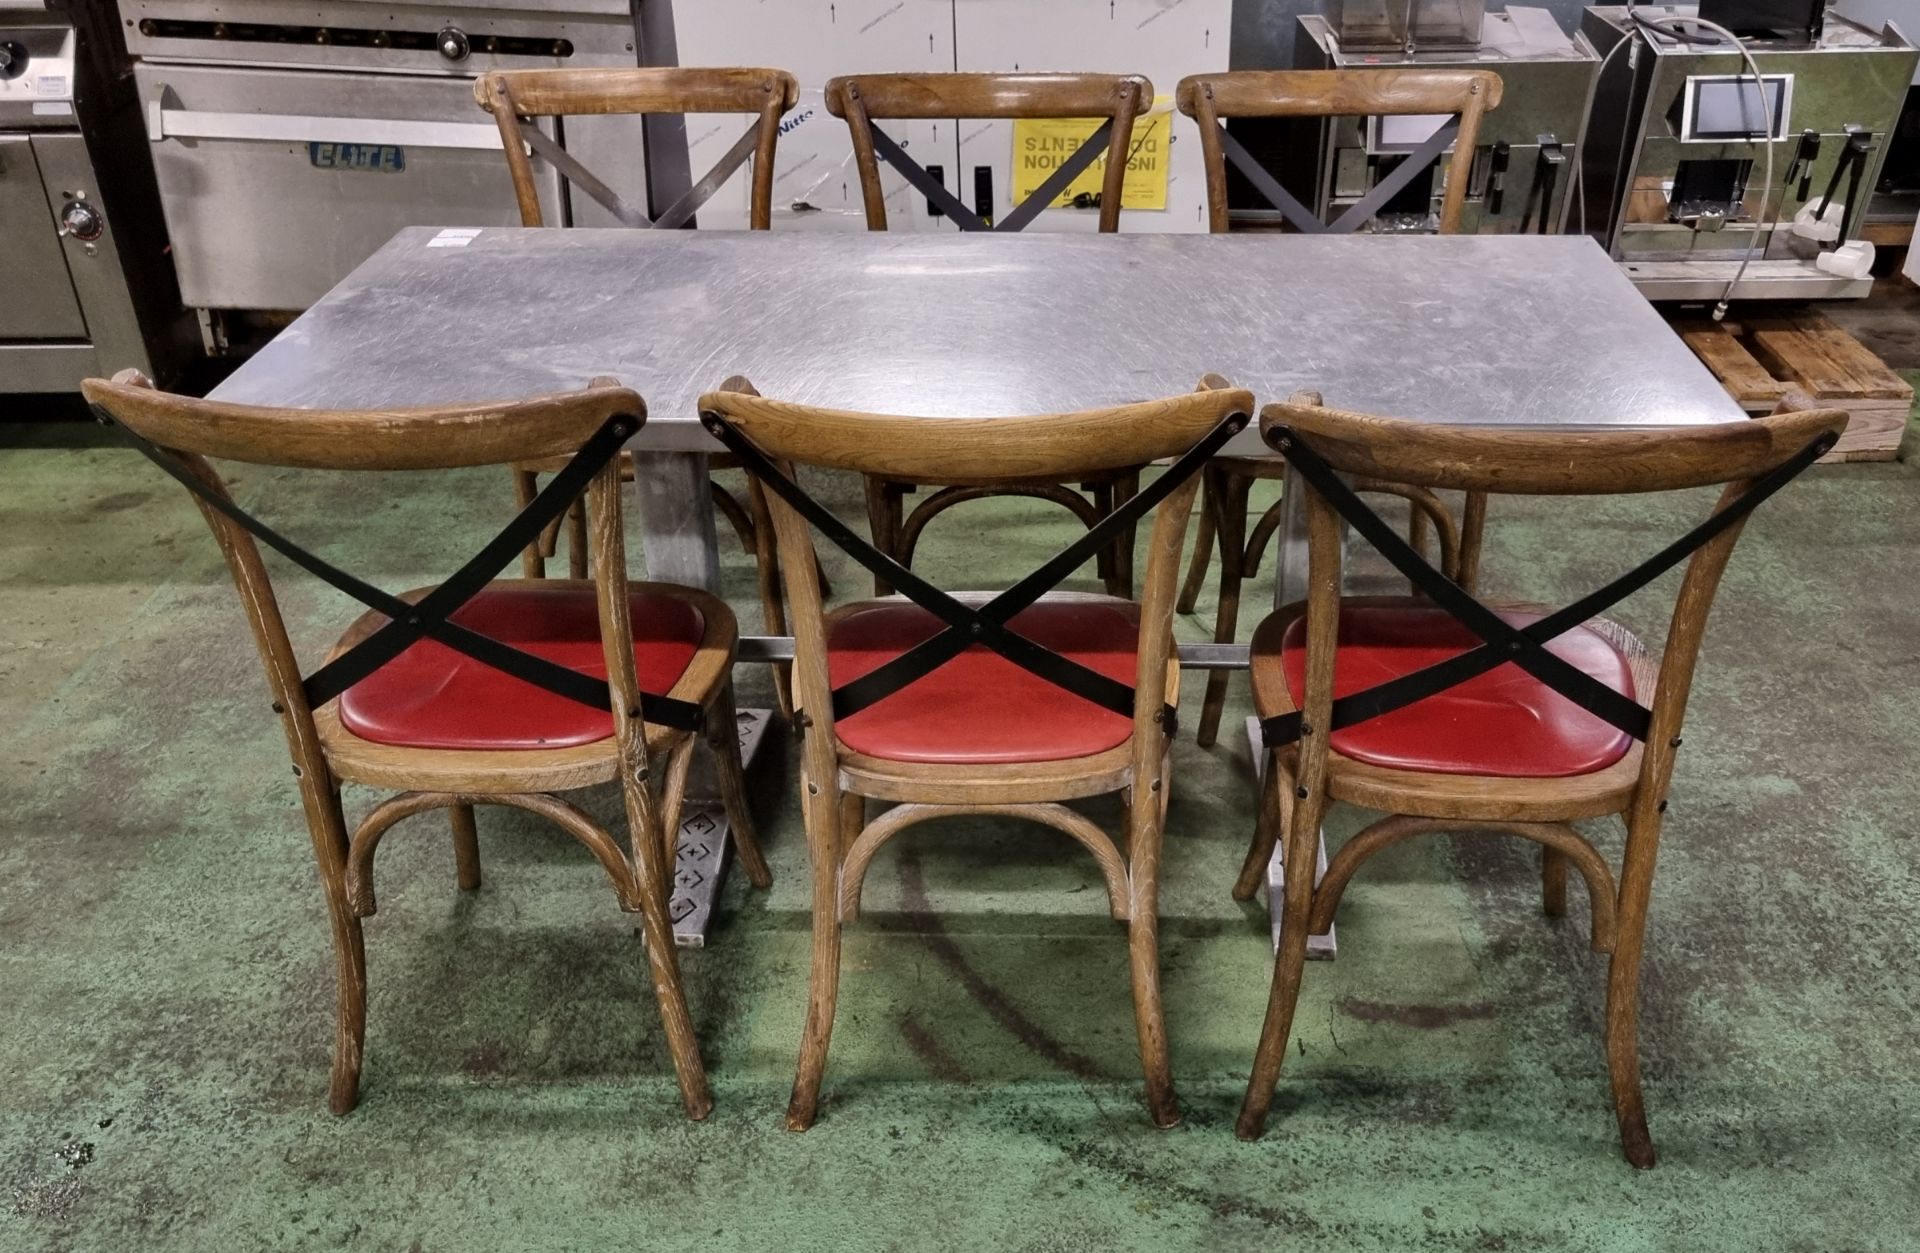 6x Wooden restaurant chairs, Metal table - W 1610 x D 690 x H 760 mm - Image 2 of 5